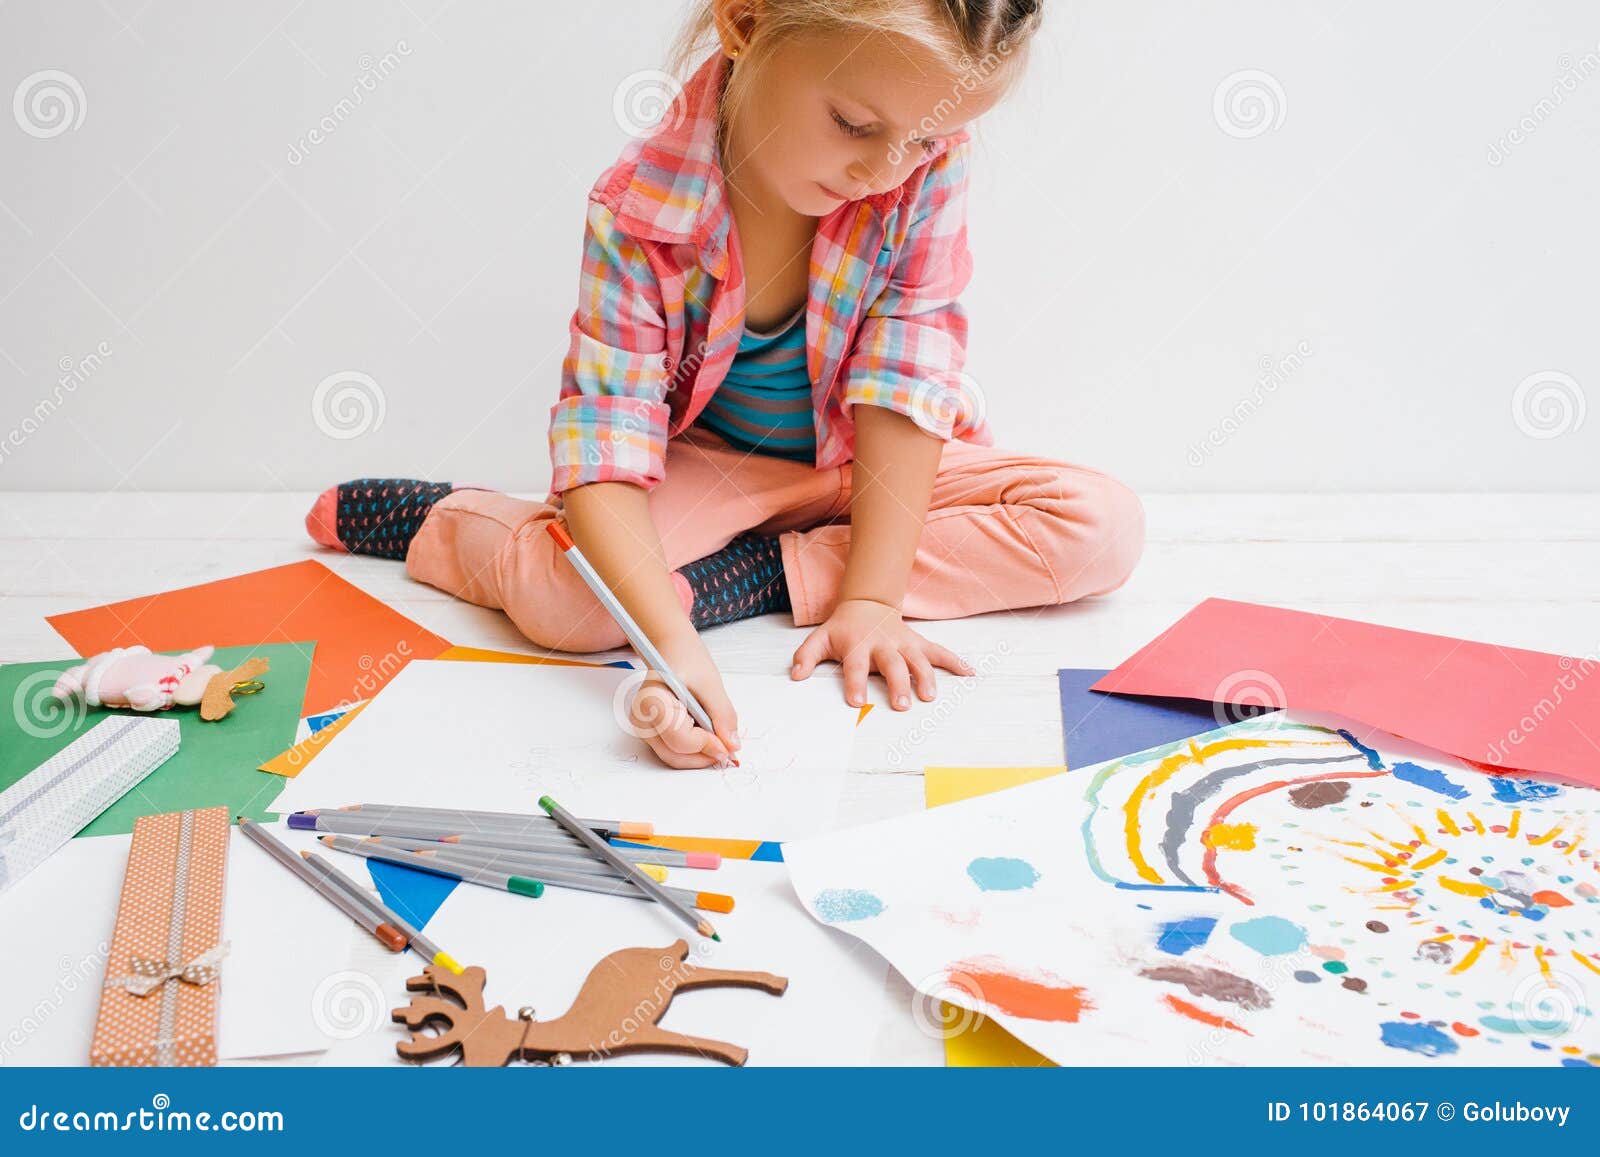 early childhood education. artistic child